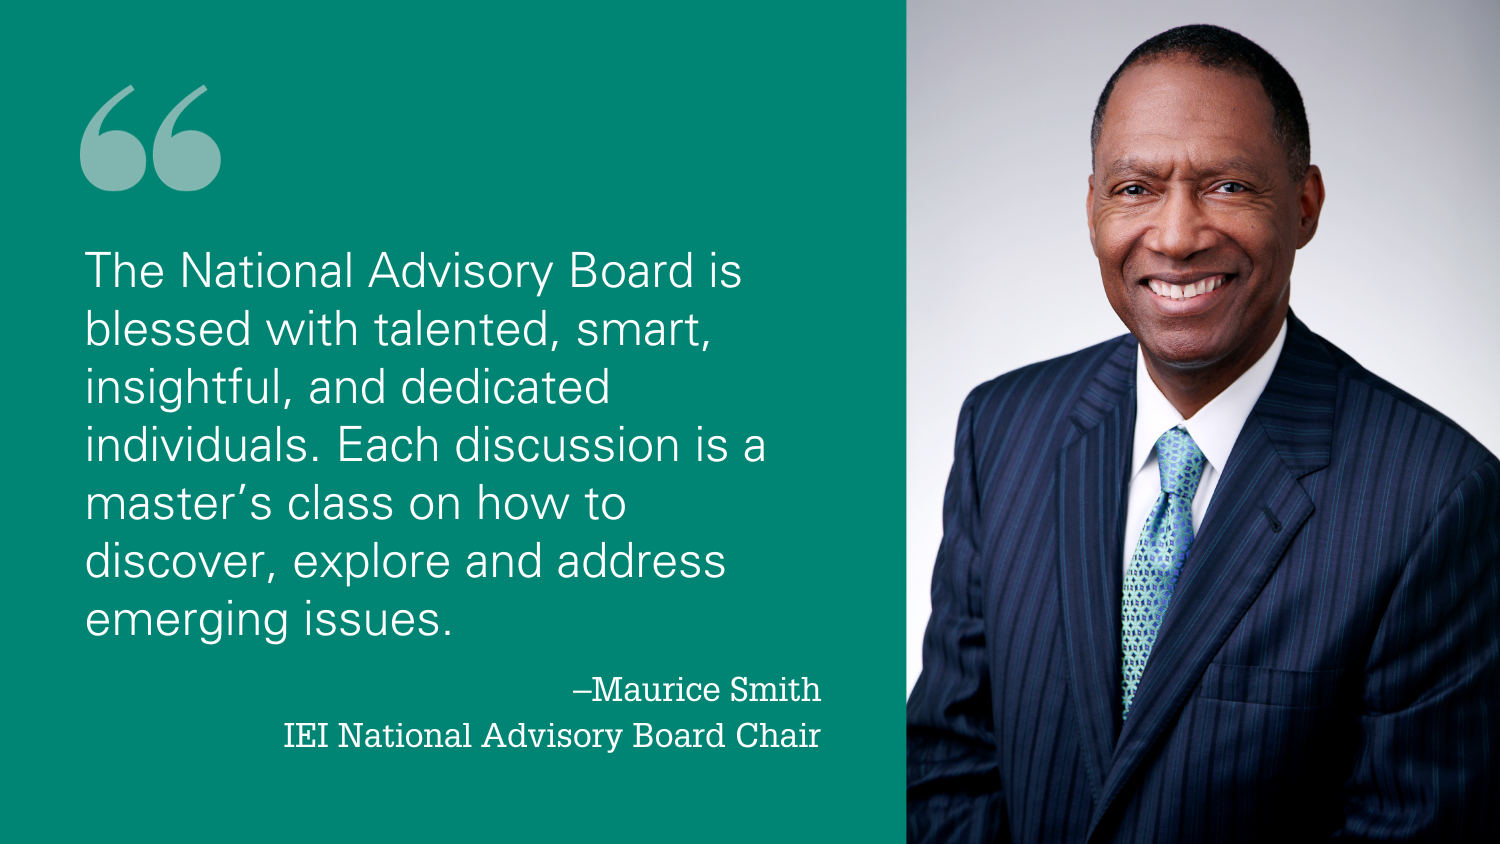 Photo of Maurice next to a quote by him: The National Advisory Board is blessed with talented, smart, insightful, and dedicated individuals. Each discussion is a master’s class on how to discover, explore and address emerging issues.